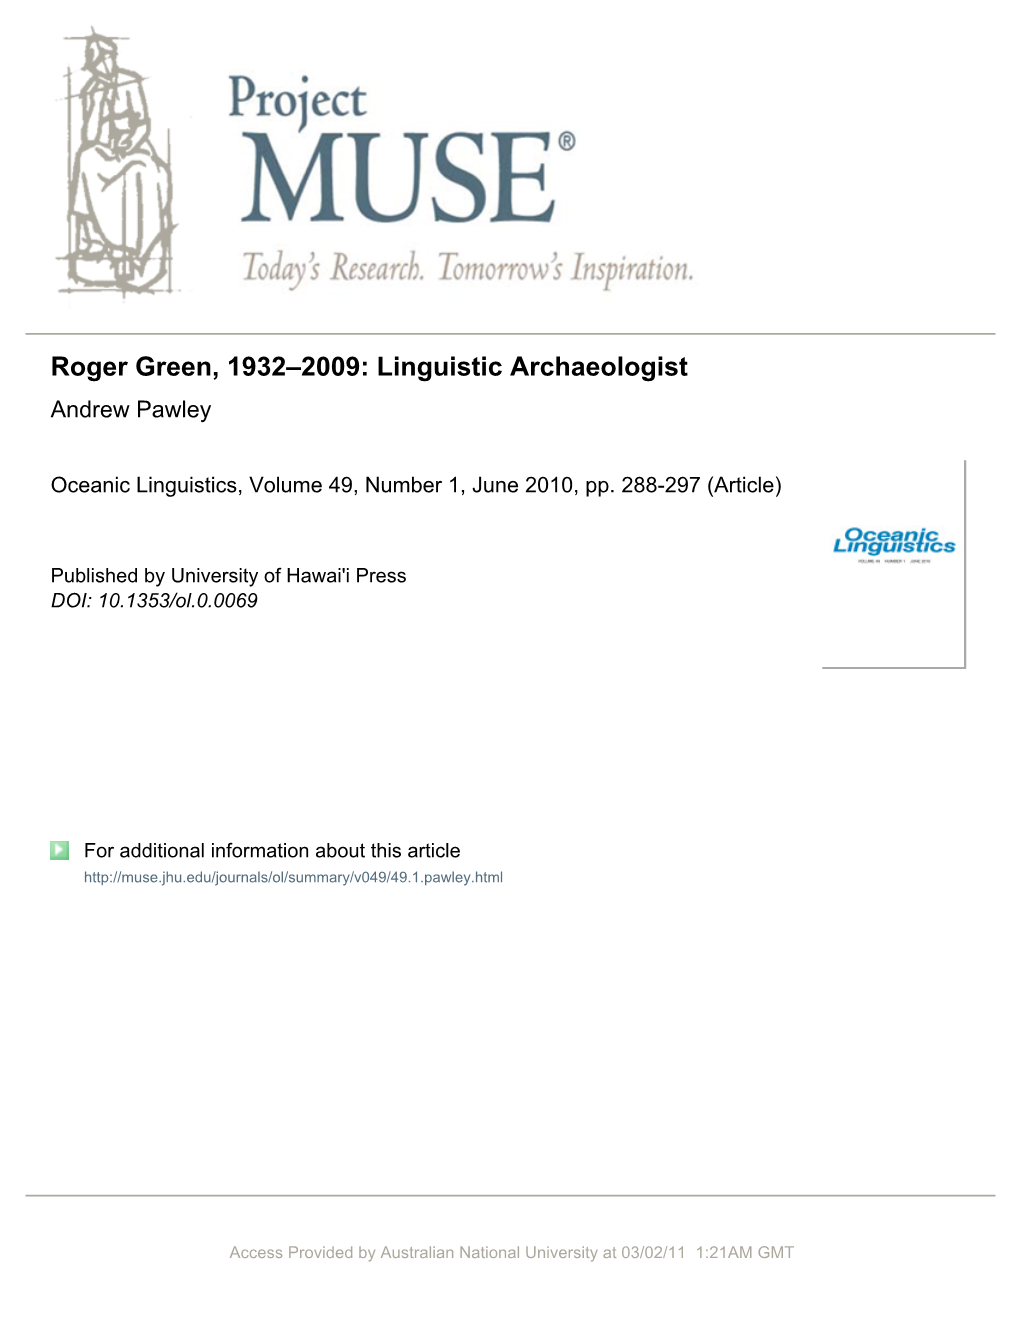 Roger Green, 1932–2009: Linguistic Archaeologist Andrew Pawley